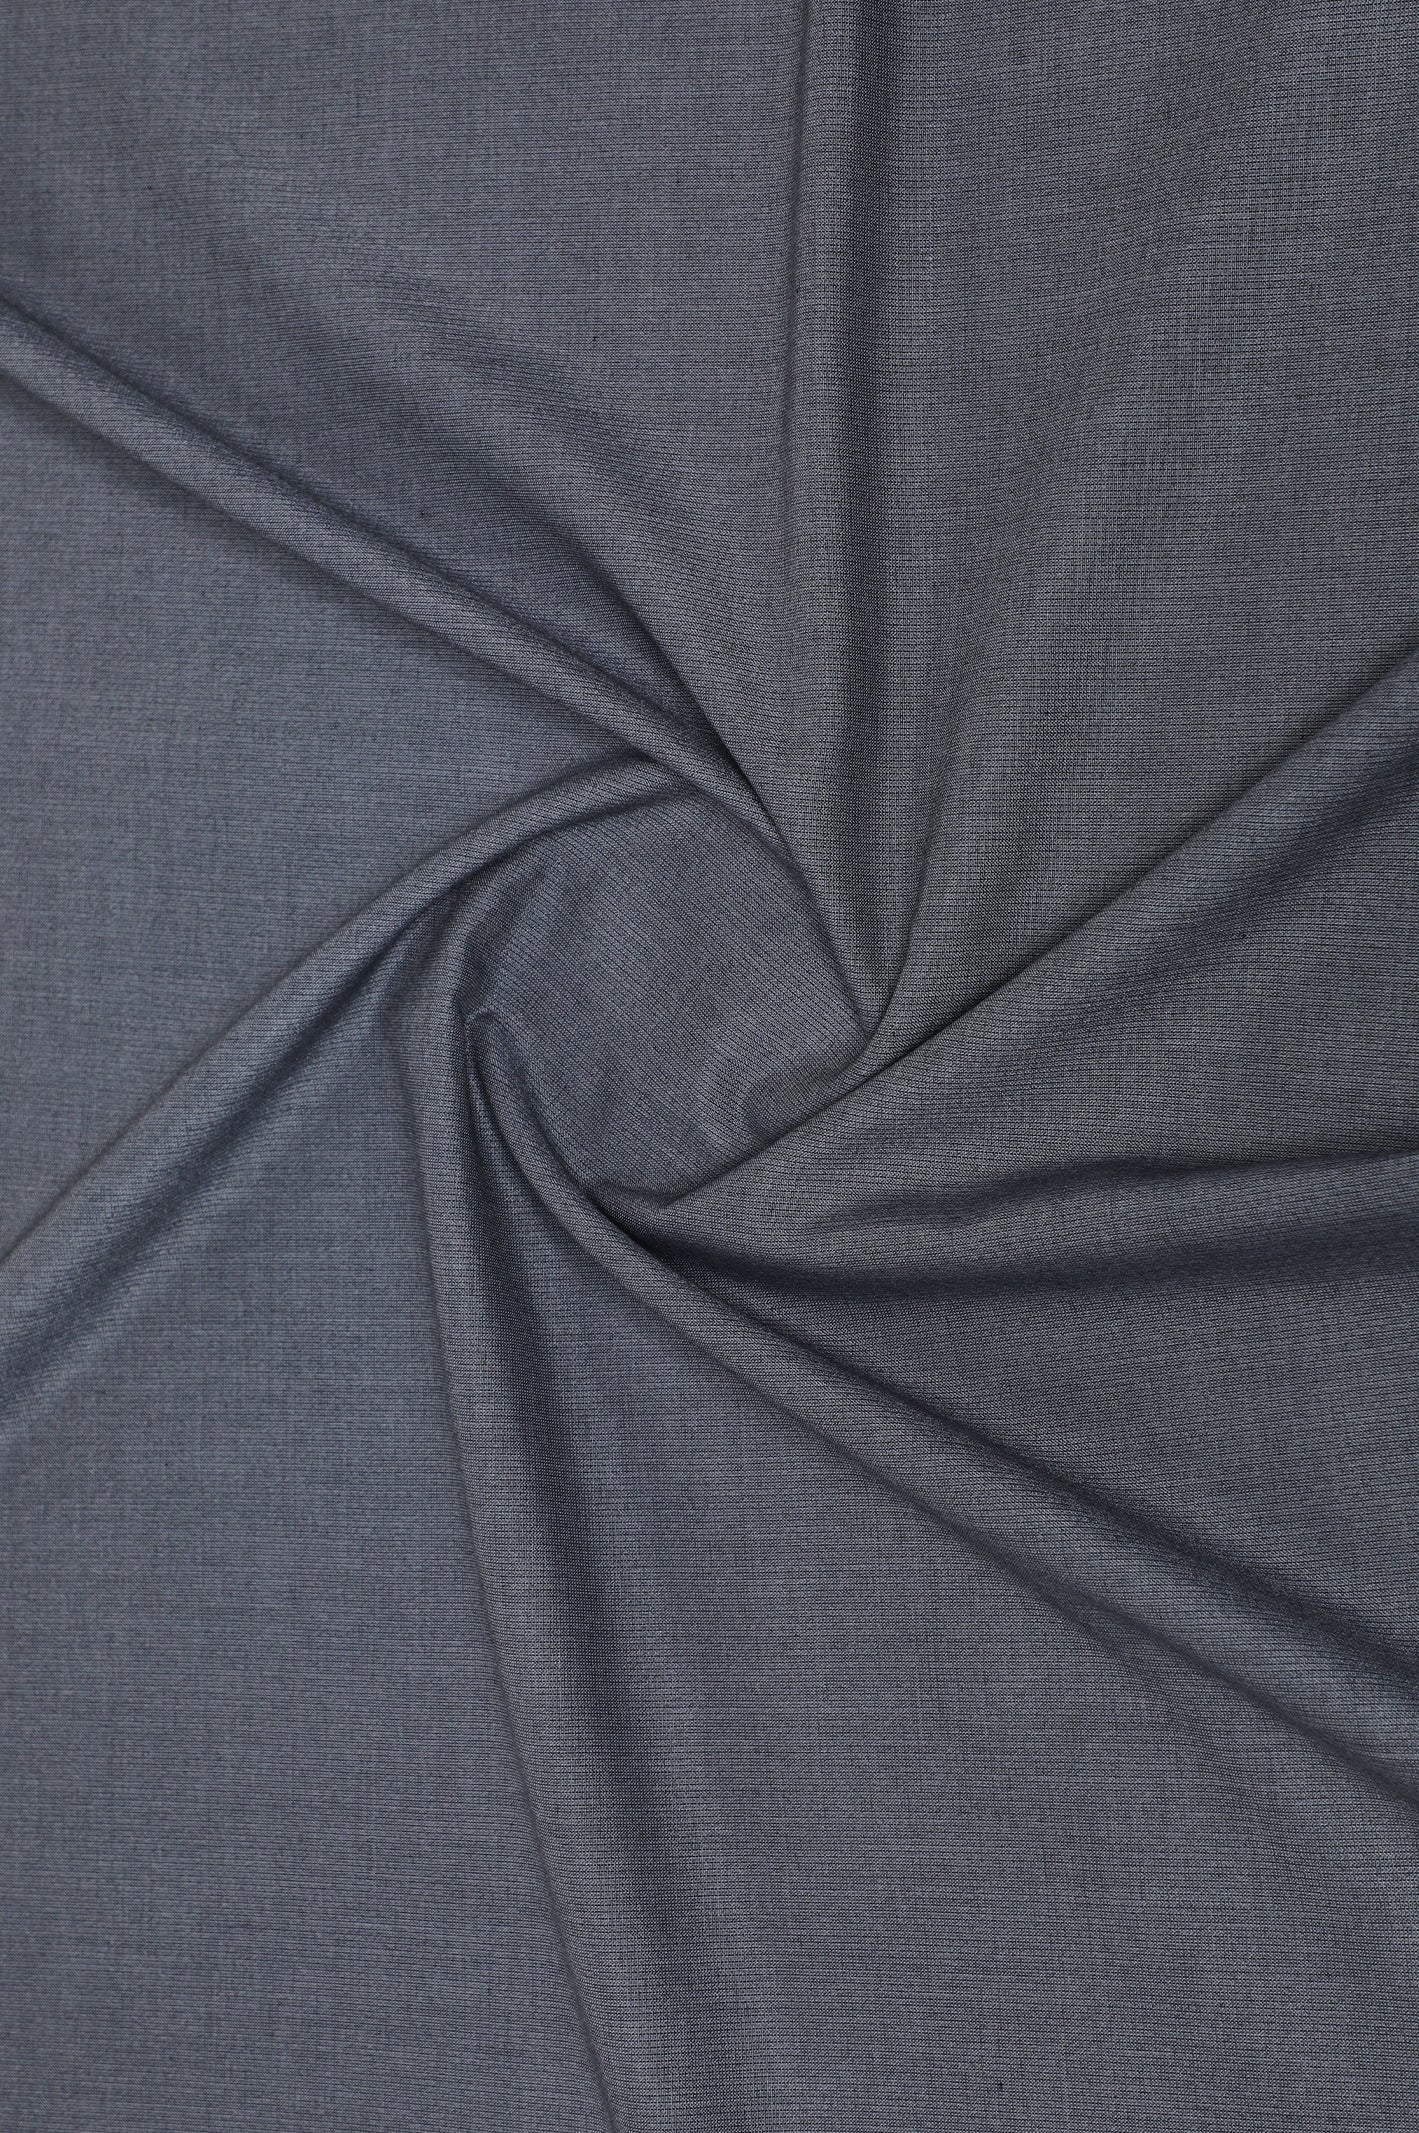 Self Unstitched Fabric for Men SKU: US0228-L-GREY - Diners